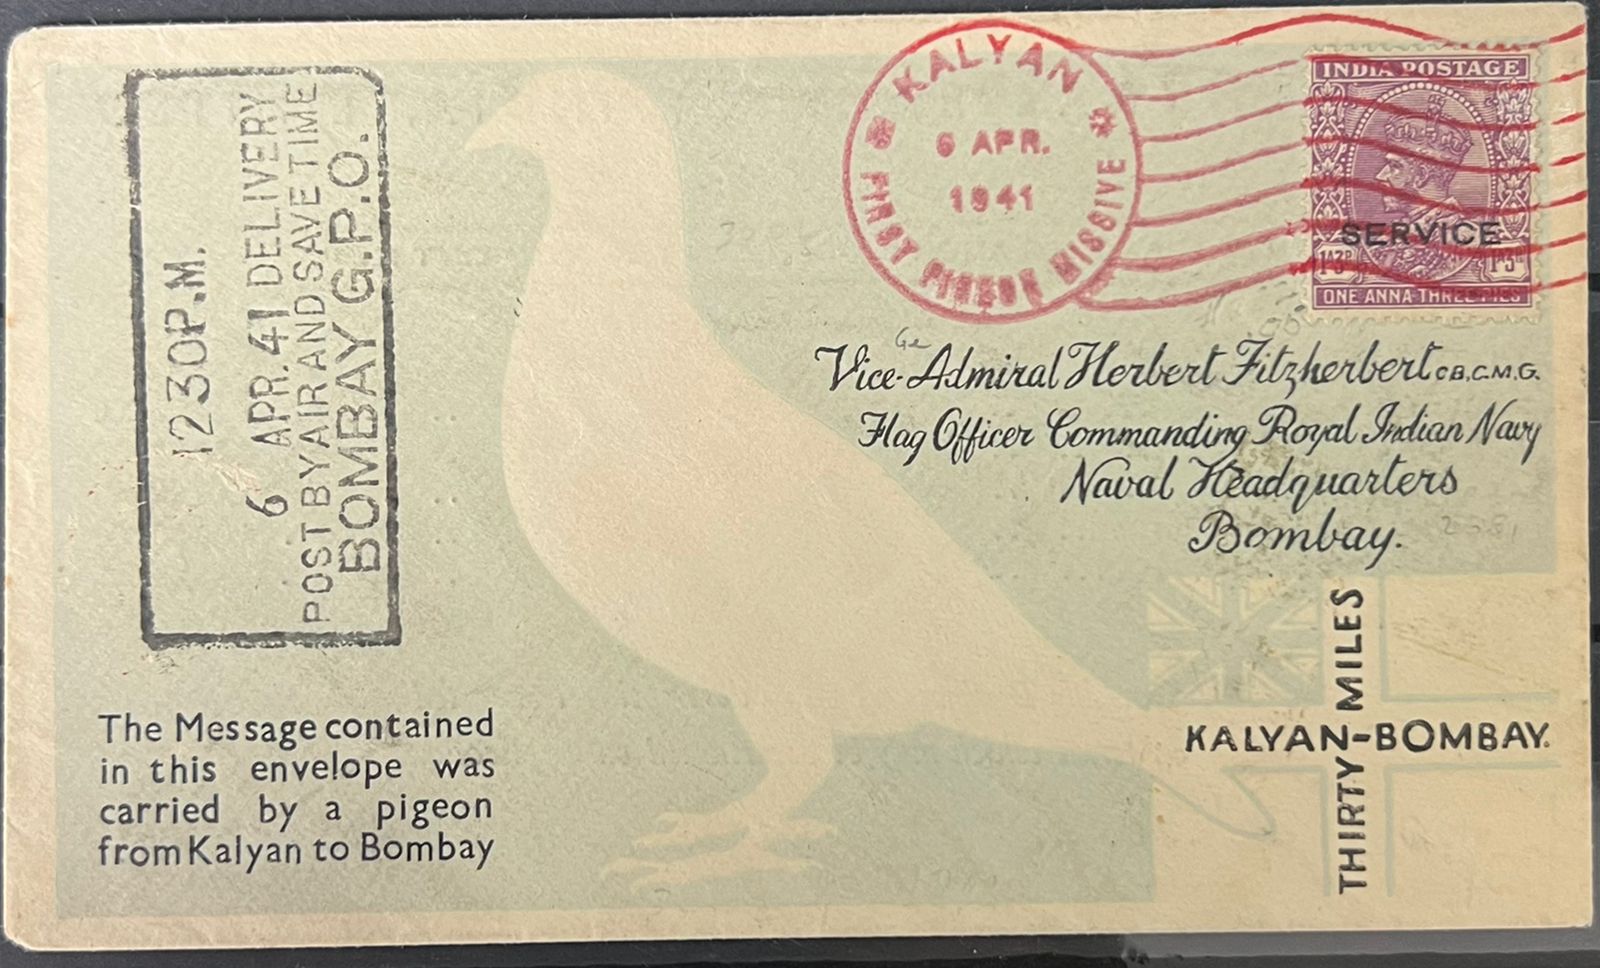 India Pigeongram No.7 - 1941 (6th Apr) Kalyan to Bombay (Including Content) - 2000 Missives Carried by 250 Pigeons